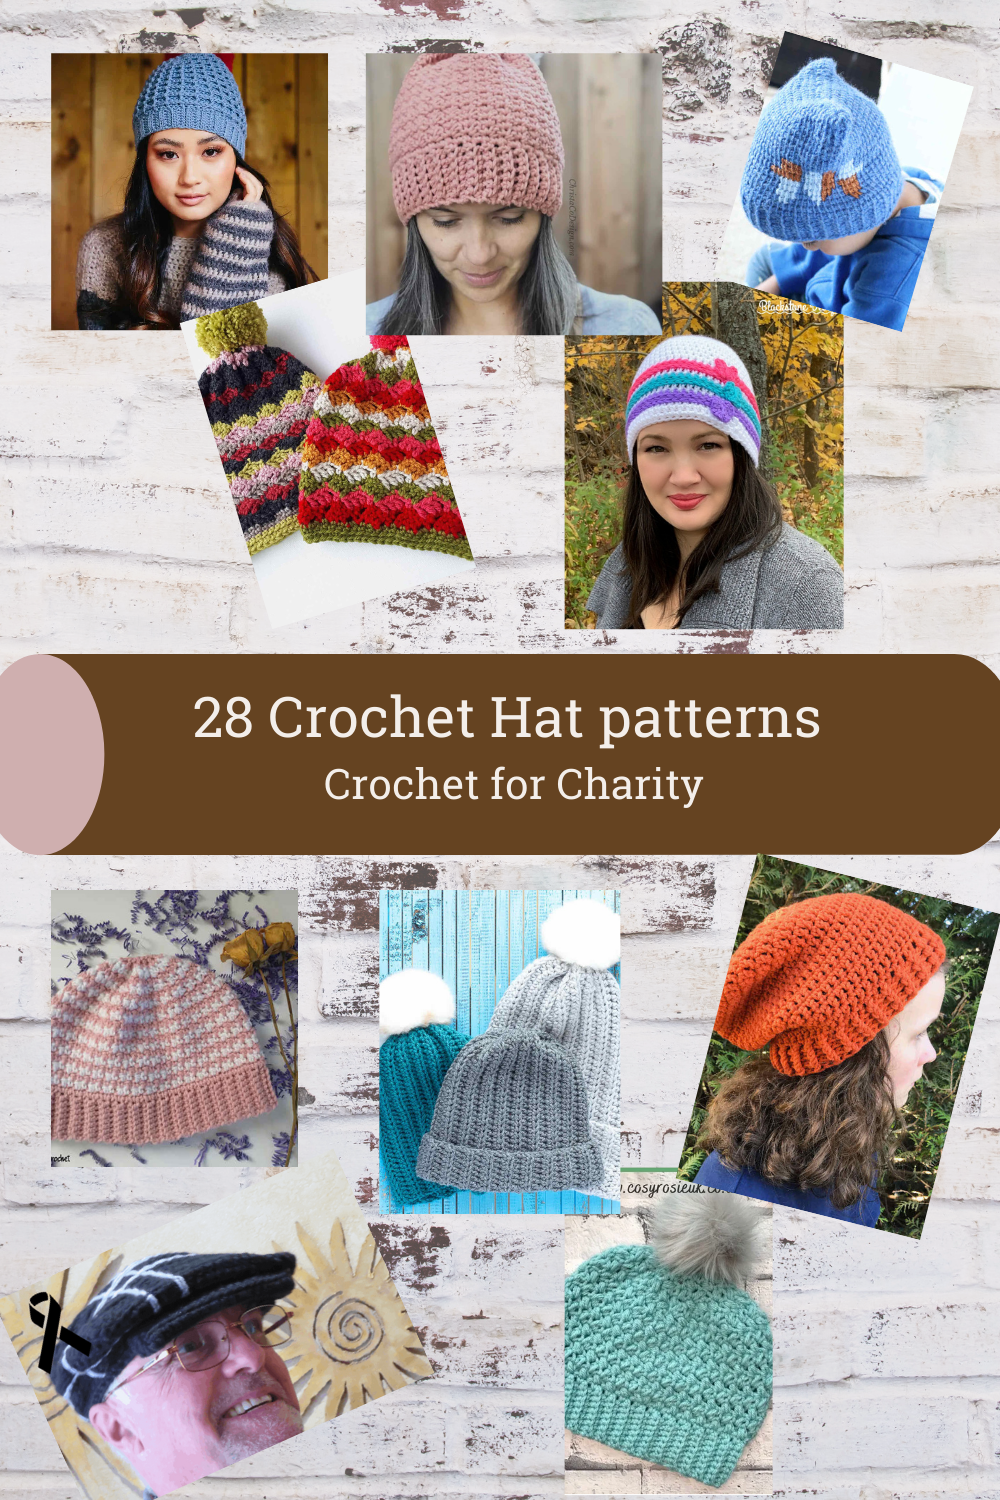 28 Crochet Hat Patterns perfect for you or for charity | blog post by MadameStitch